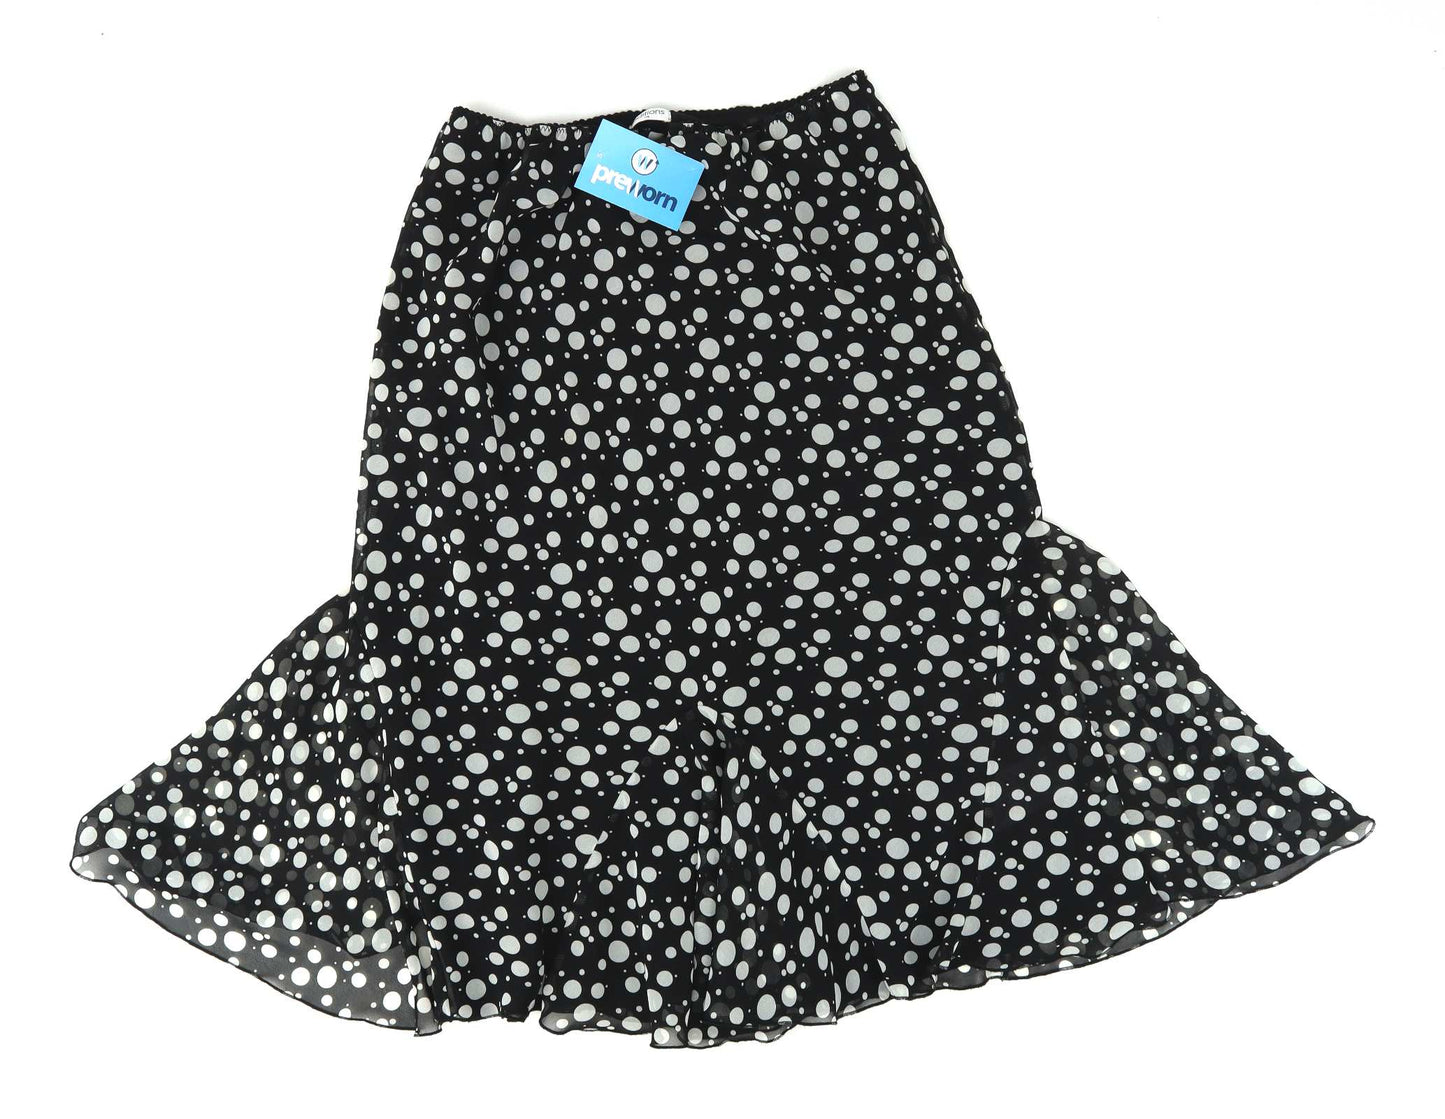 Editions Womens Size 14 Black Spotted Flare Skirt (Regular)